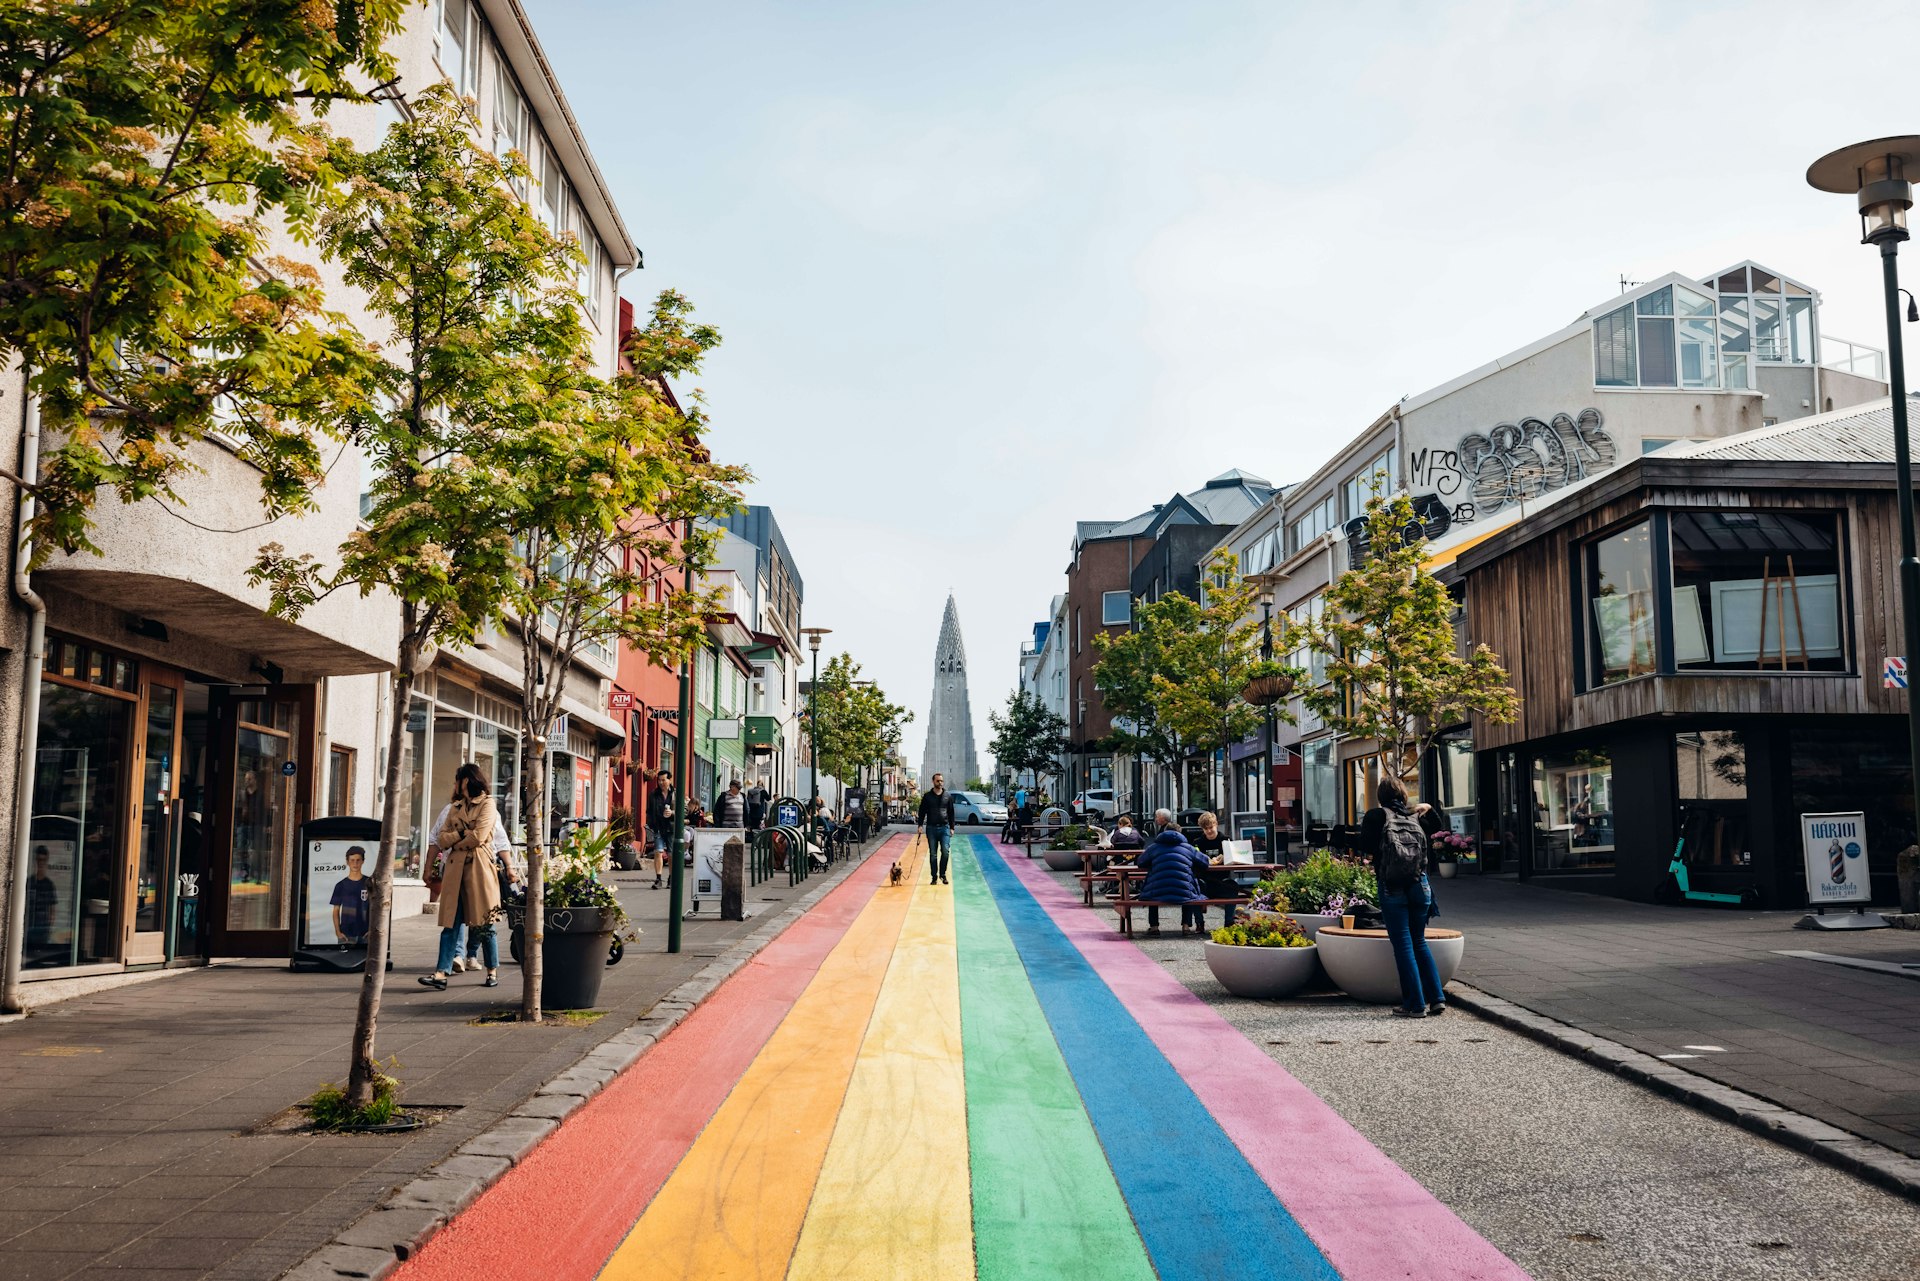 A street, with a walkway of striped rainbow colors, leads to the pointed spire of a cathedral 